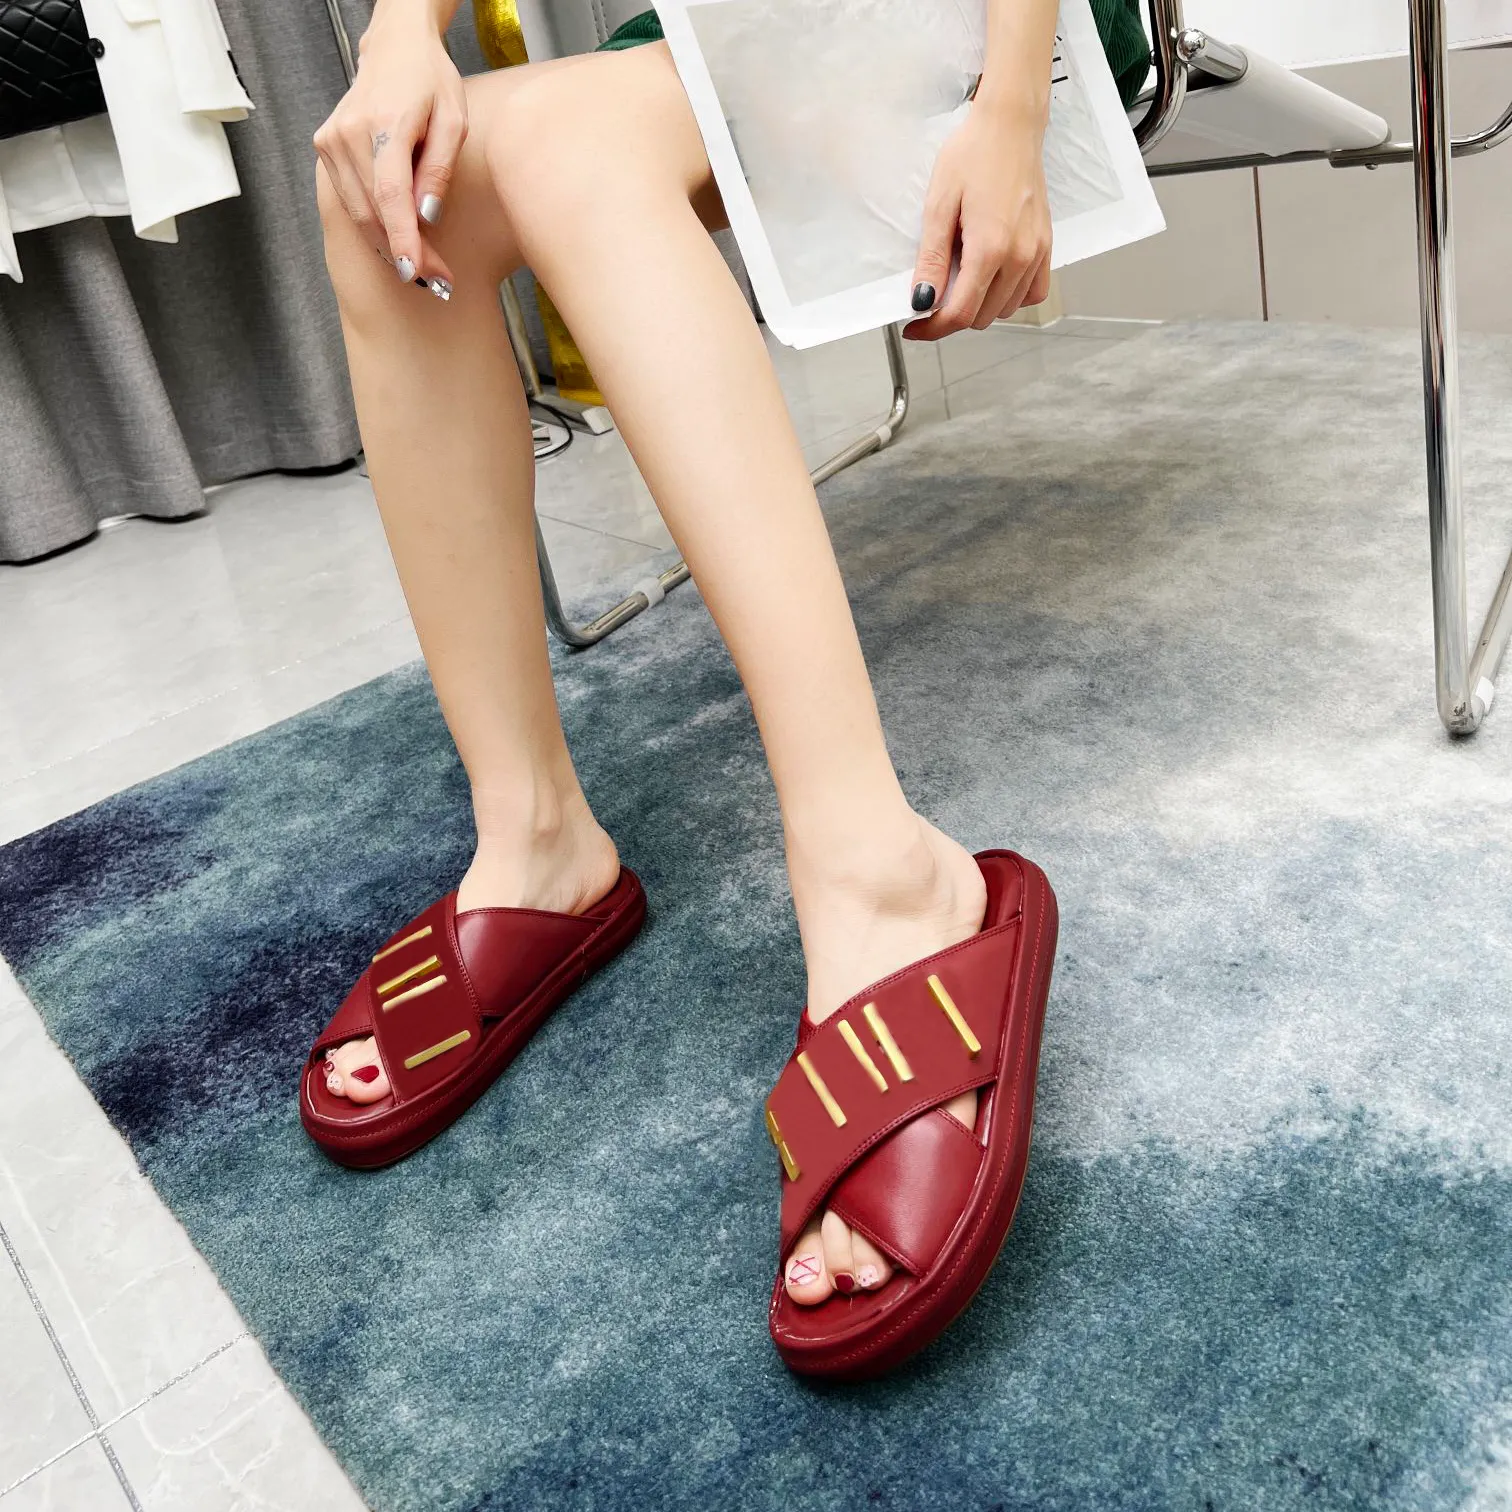 Women Slippers Summer Sandals Luxury Colorful Canvas Letter Anatomy Leather Men Slippers Model Fashion Cross Belt Gold Metal Shoes Herringbone Slippers